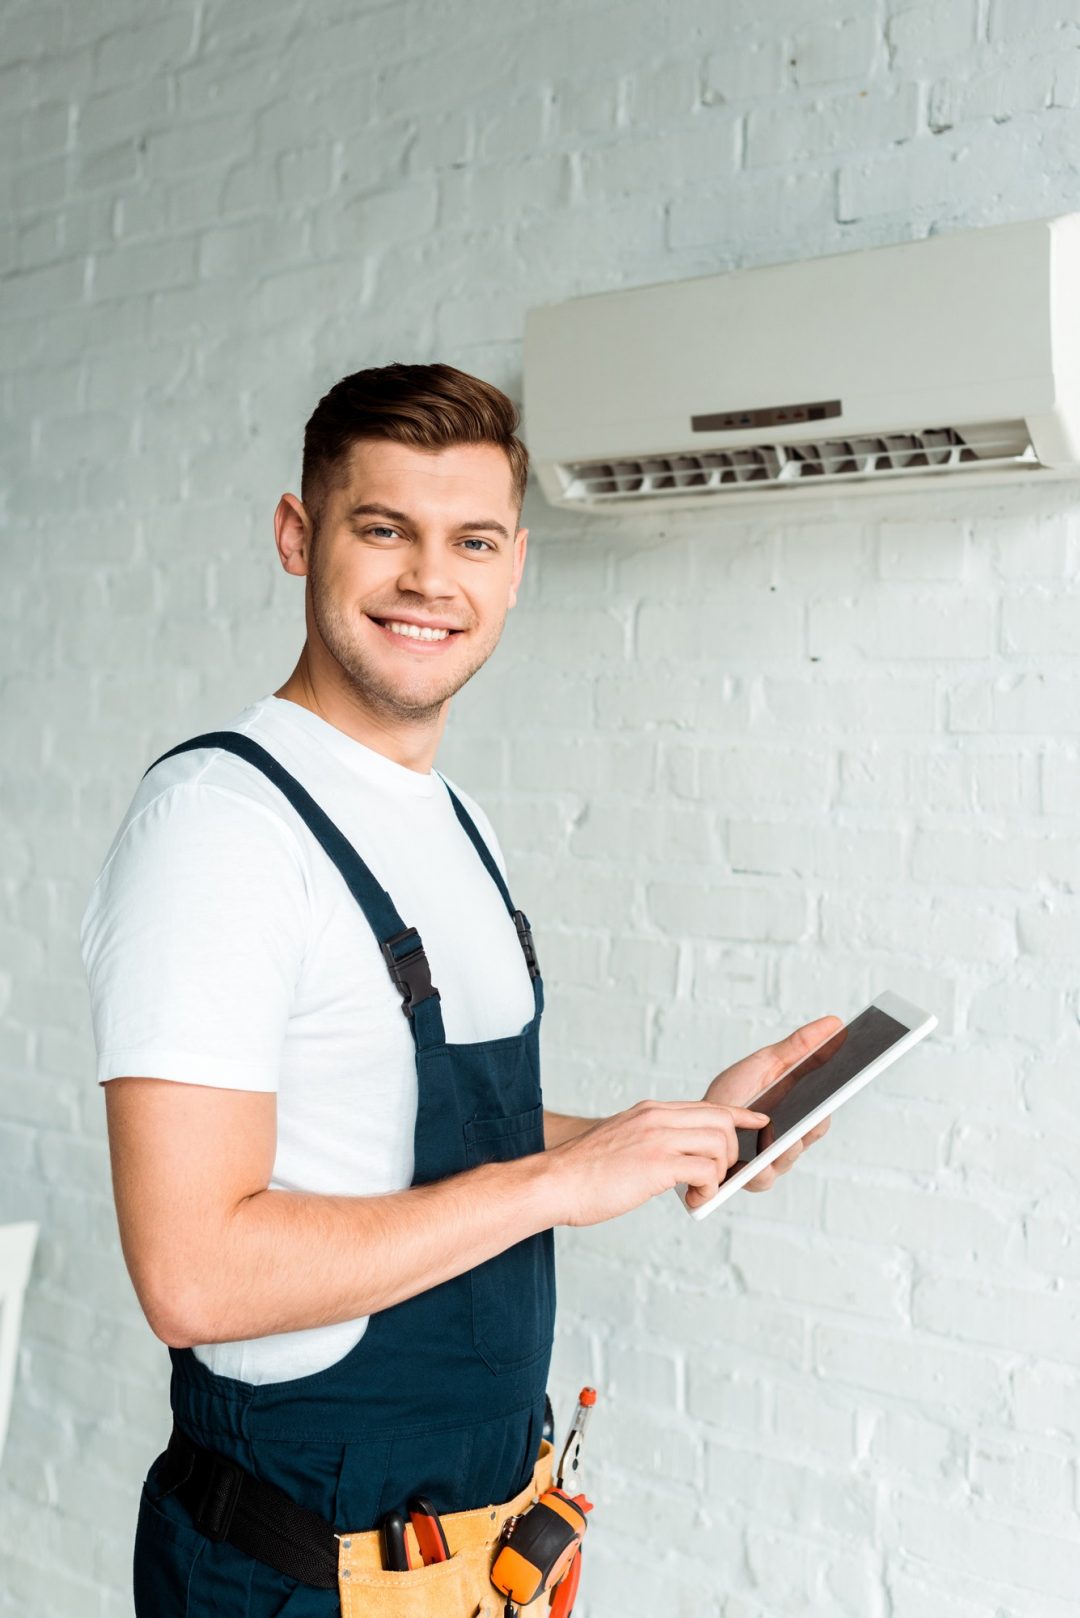 happy-installer-pointing-with-finger-at-digital-tablet-near-air-conditioner